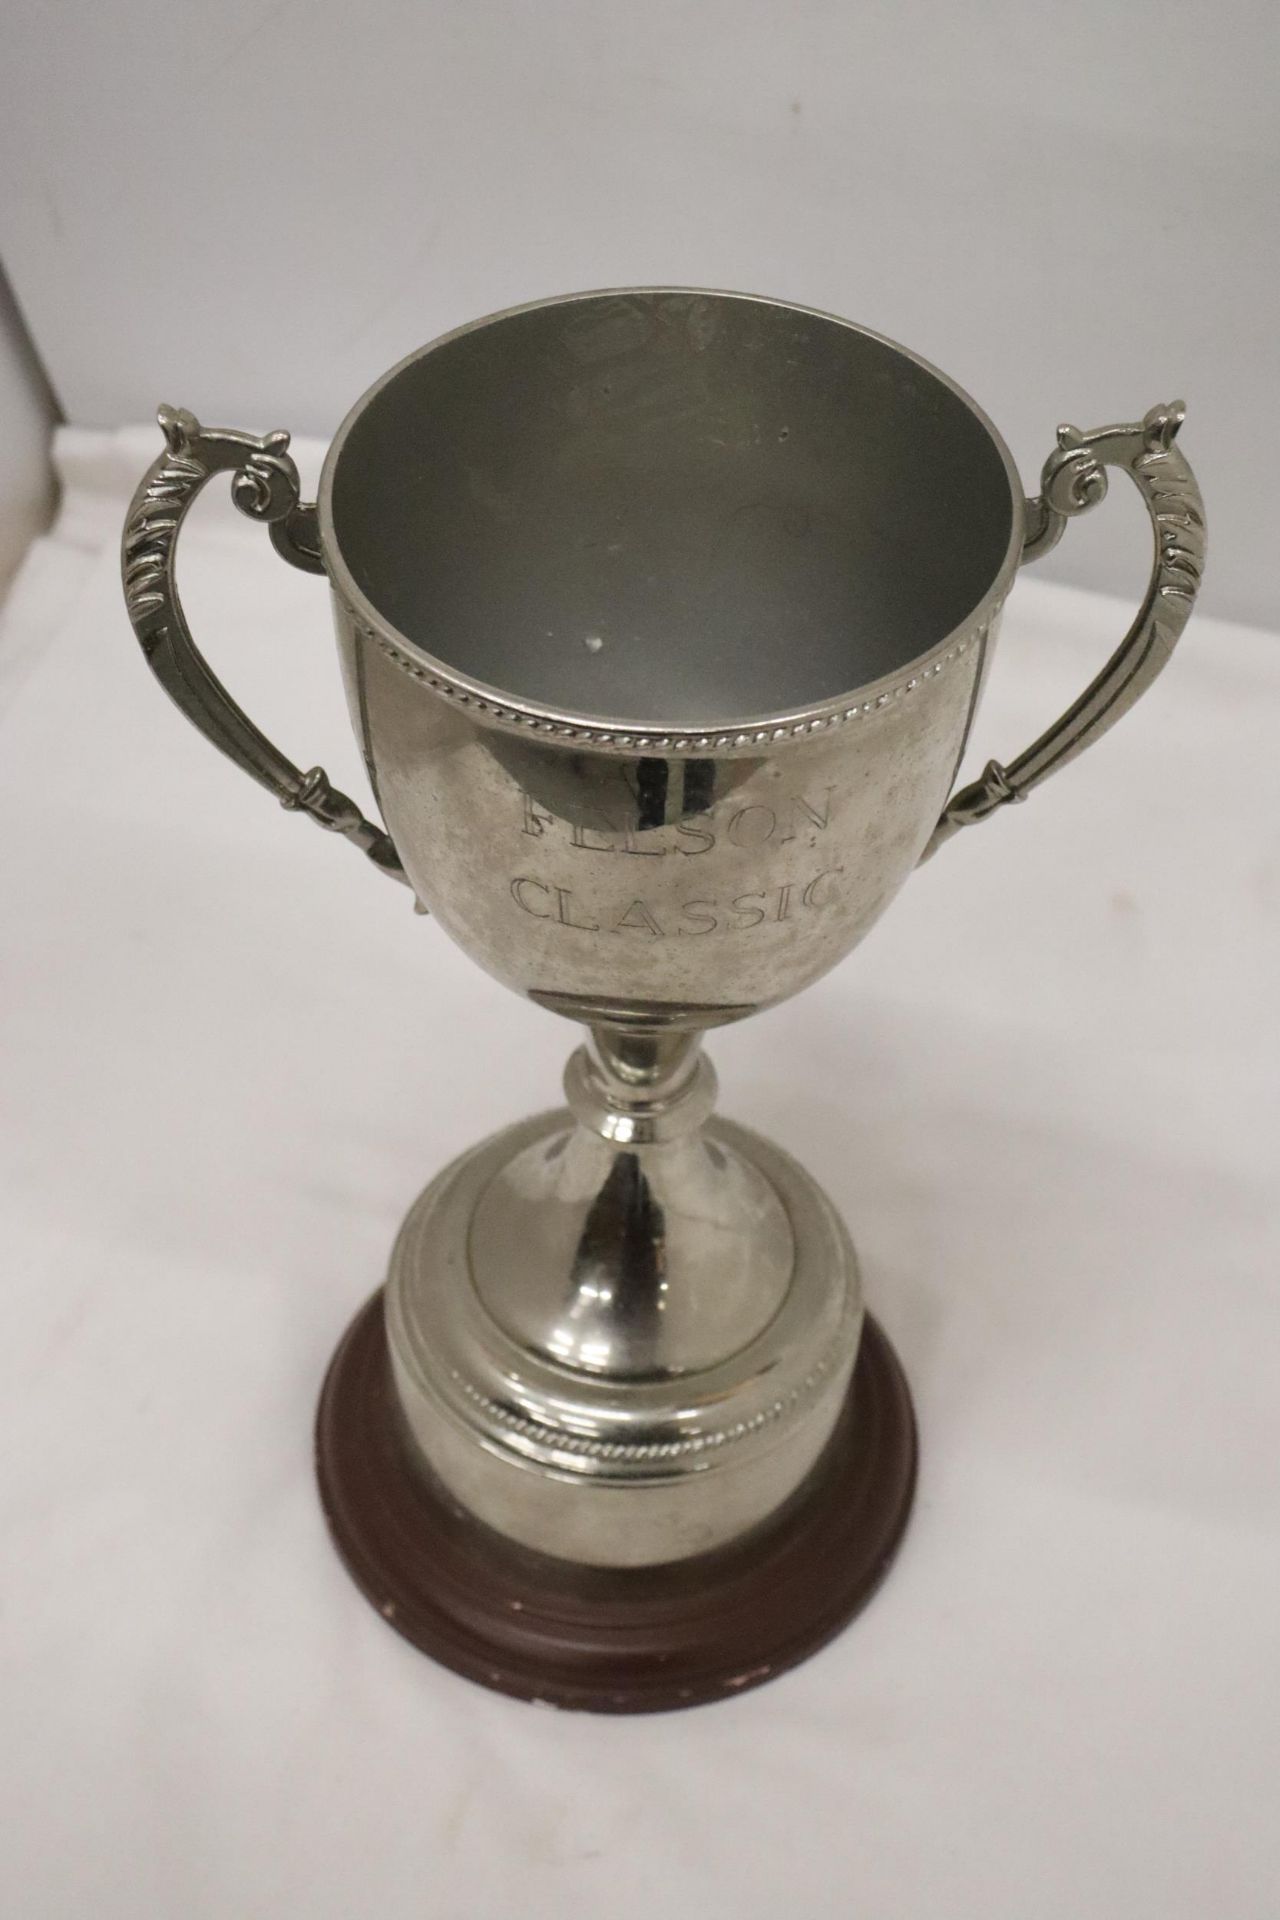 A LARGE SILVER PLATED TROPHY WITH THE INSCRIPTION 'FELSON CLASSIC', HEIGHT 31CM - Image 6 of 6